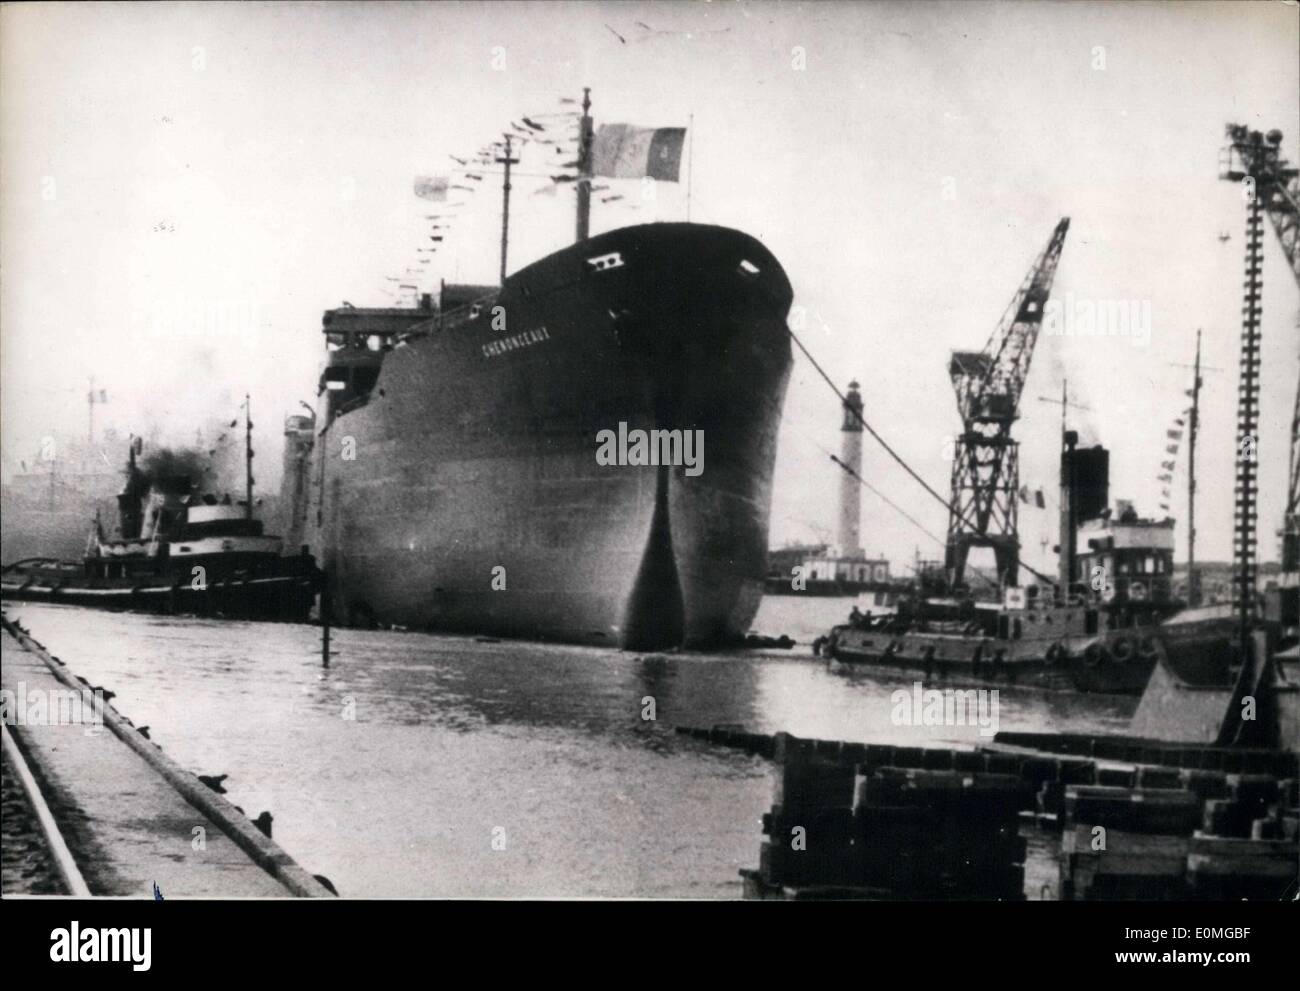 Mar. 29, 1955 - BP's New Oil Tanker Chenonceaux Put in Water Dunkerque Port Stock Photo